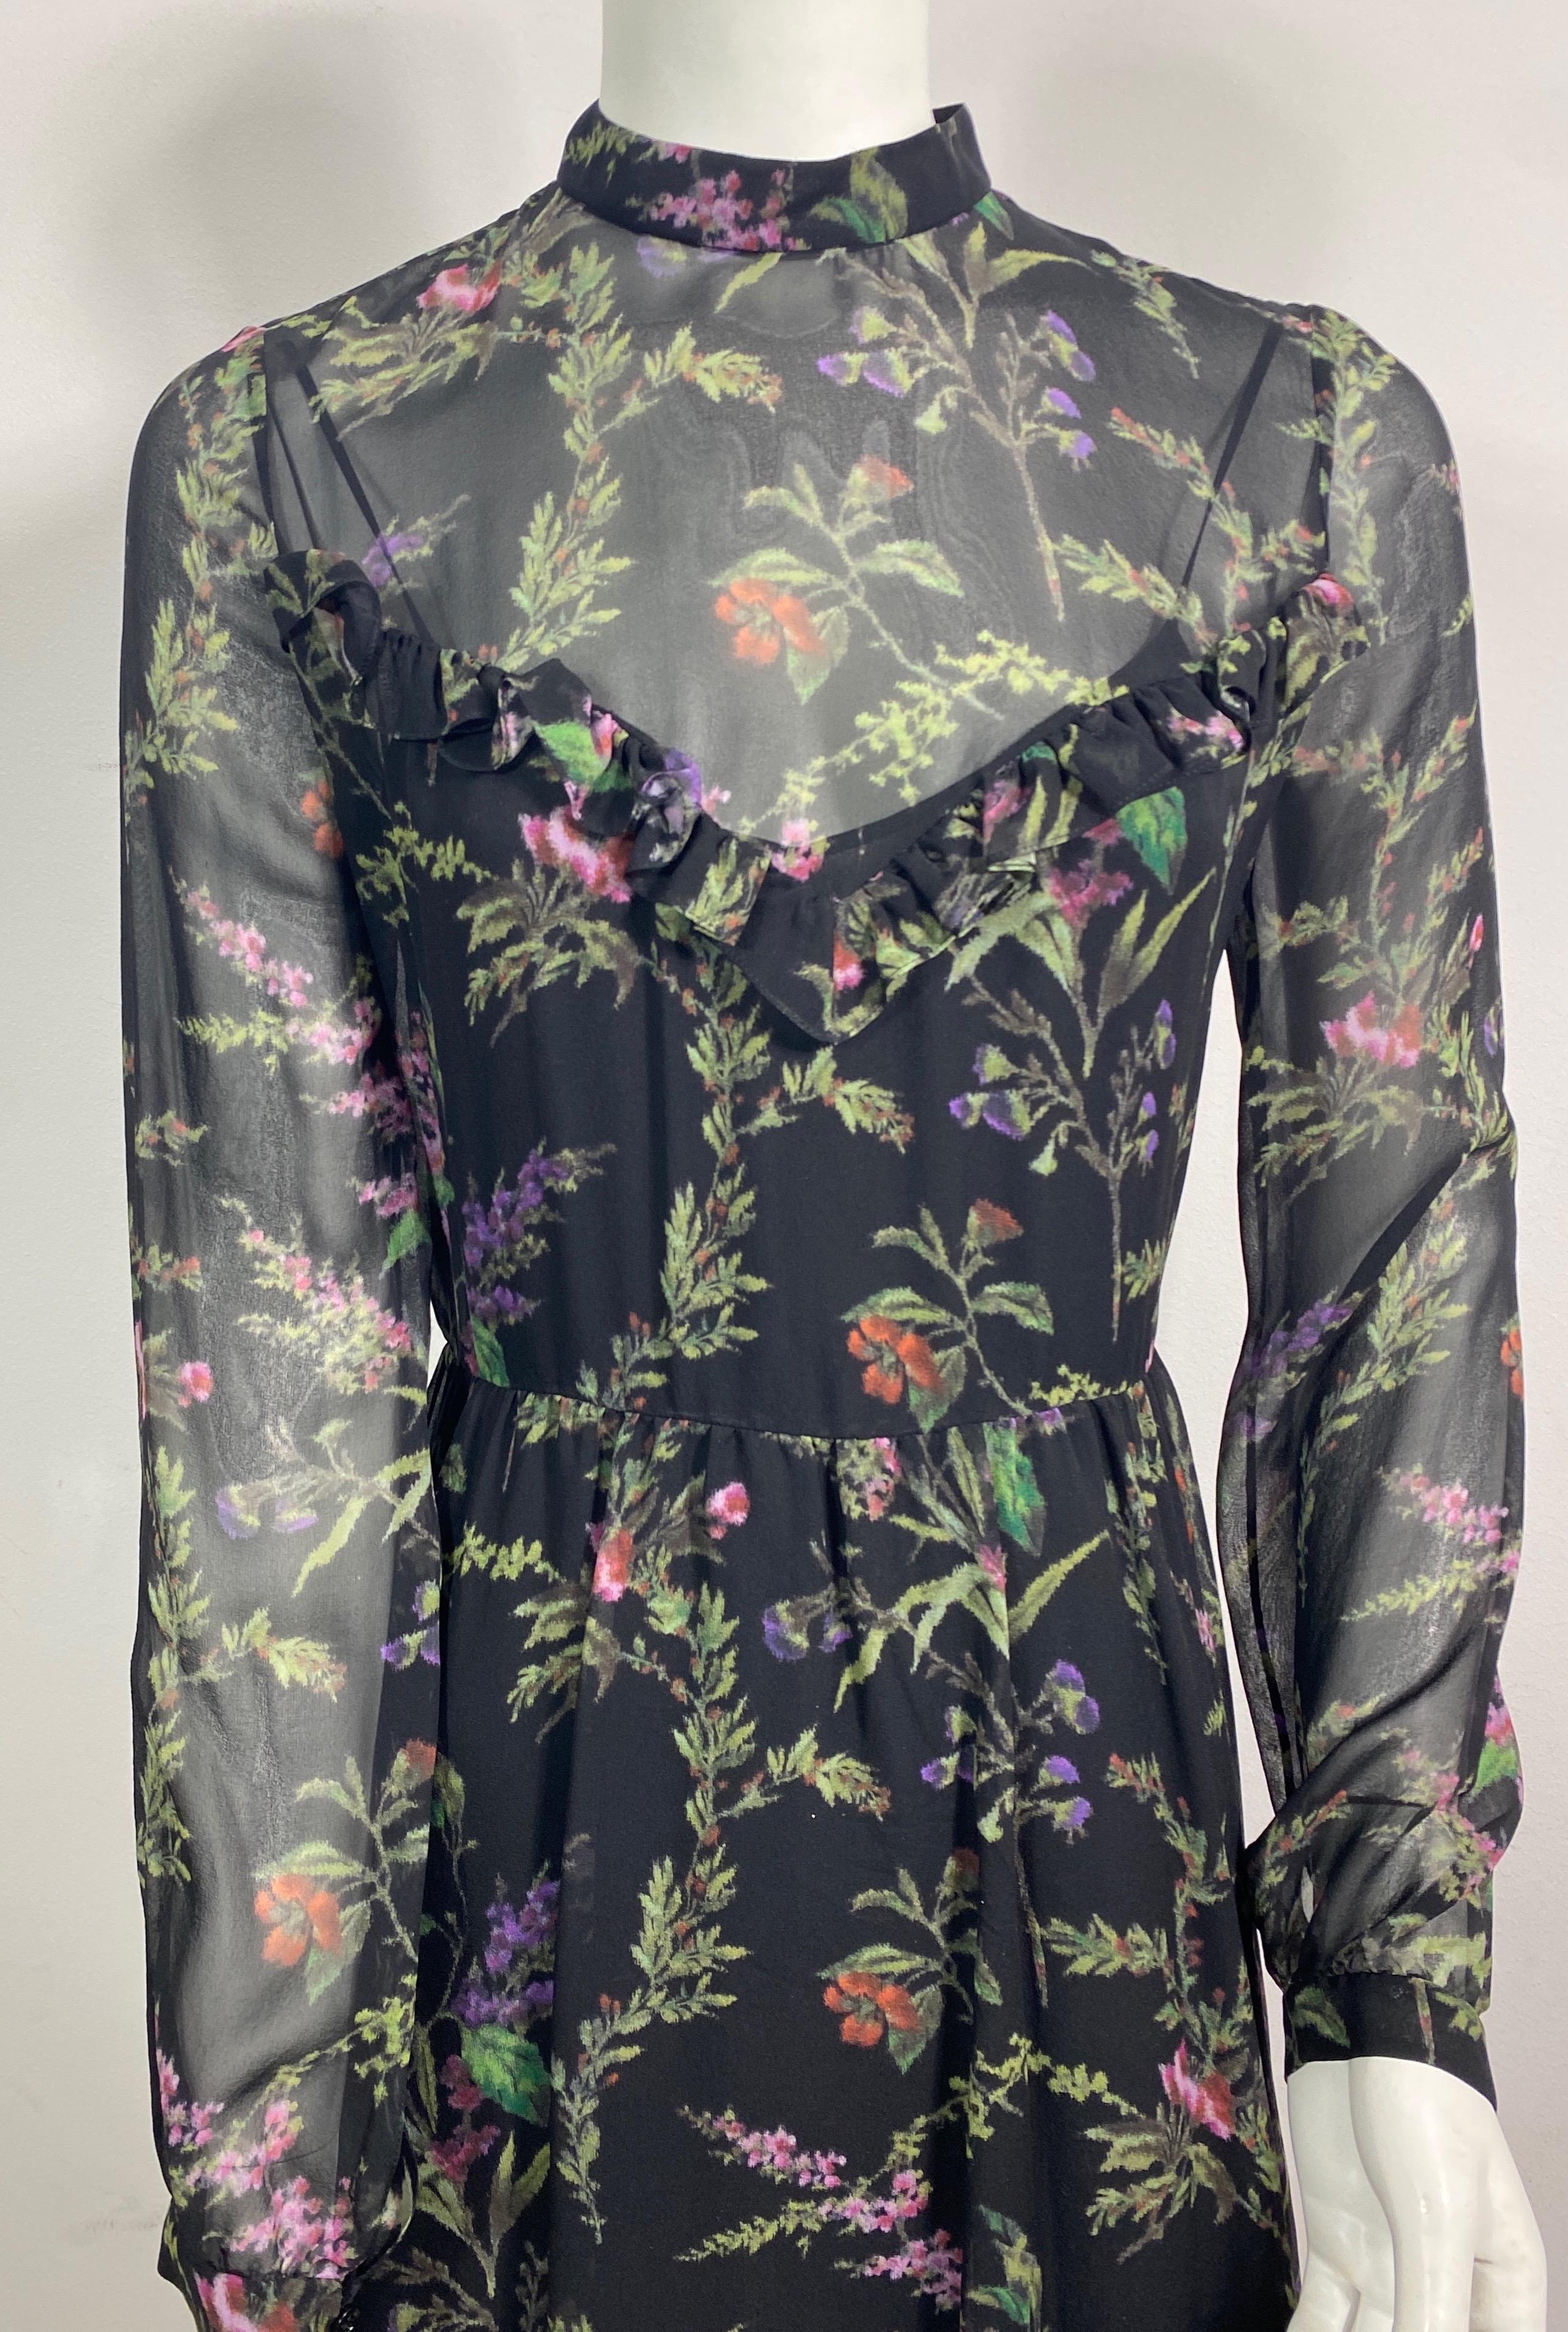 Christian Dior Black Floral Print Silk Chiffon Long Sleeve Dress - Size 36 In Excellent Condition For Sale In West Palm Beach, FL